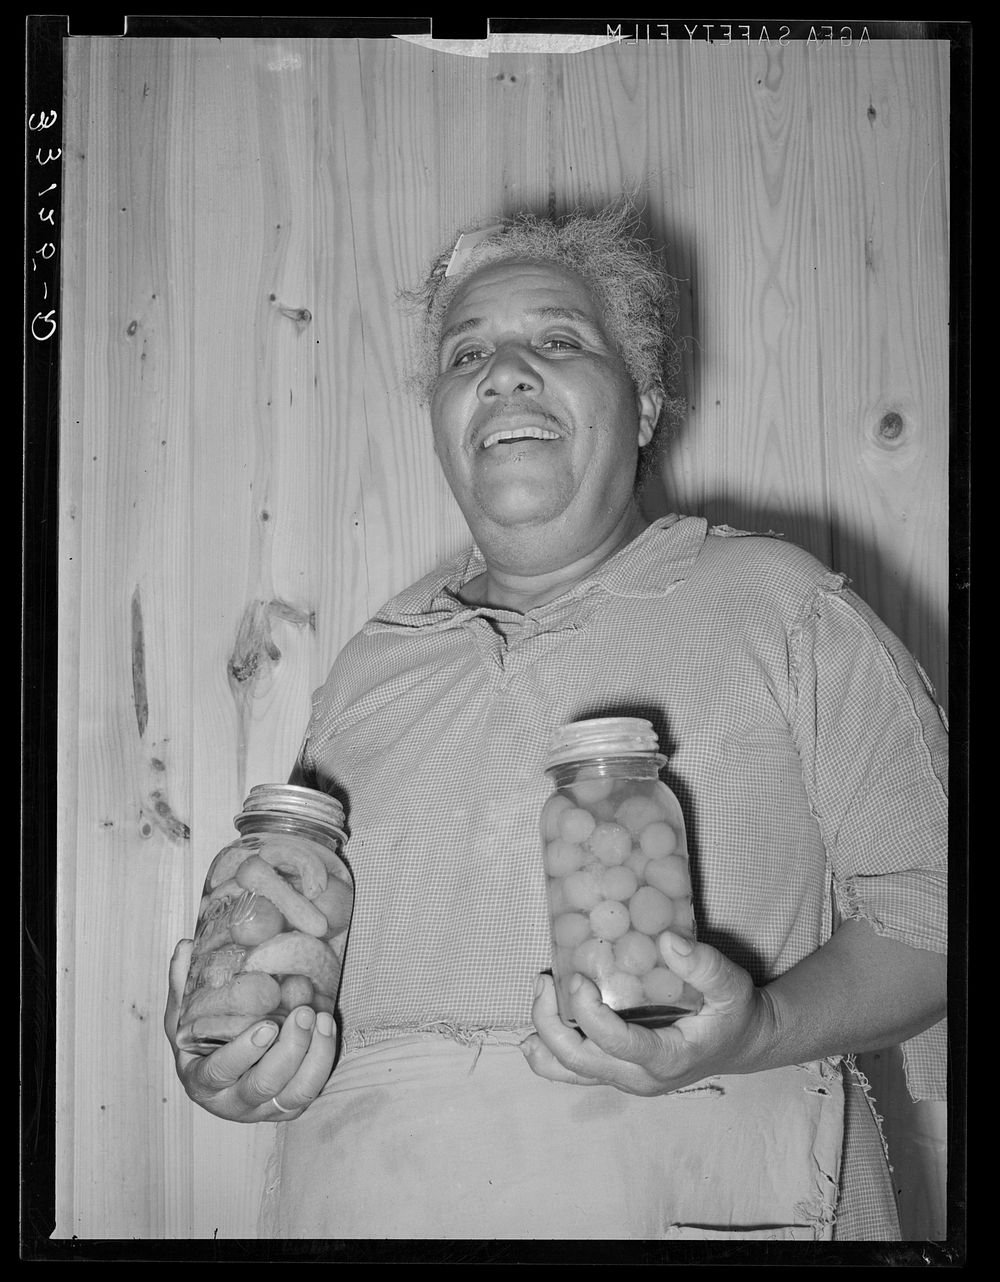 Wife of FSA (Farm Security Administration) client with home-canned vegetables. Sabine Farms, Marshall, Texas by Russell Lee